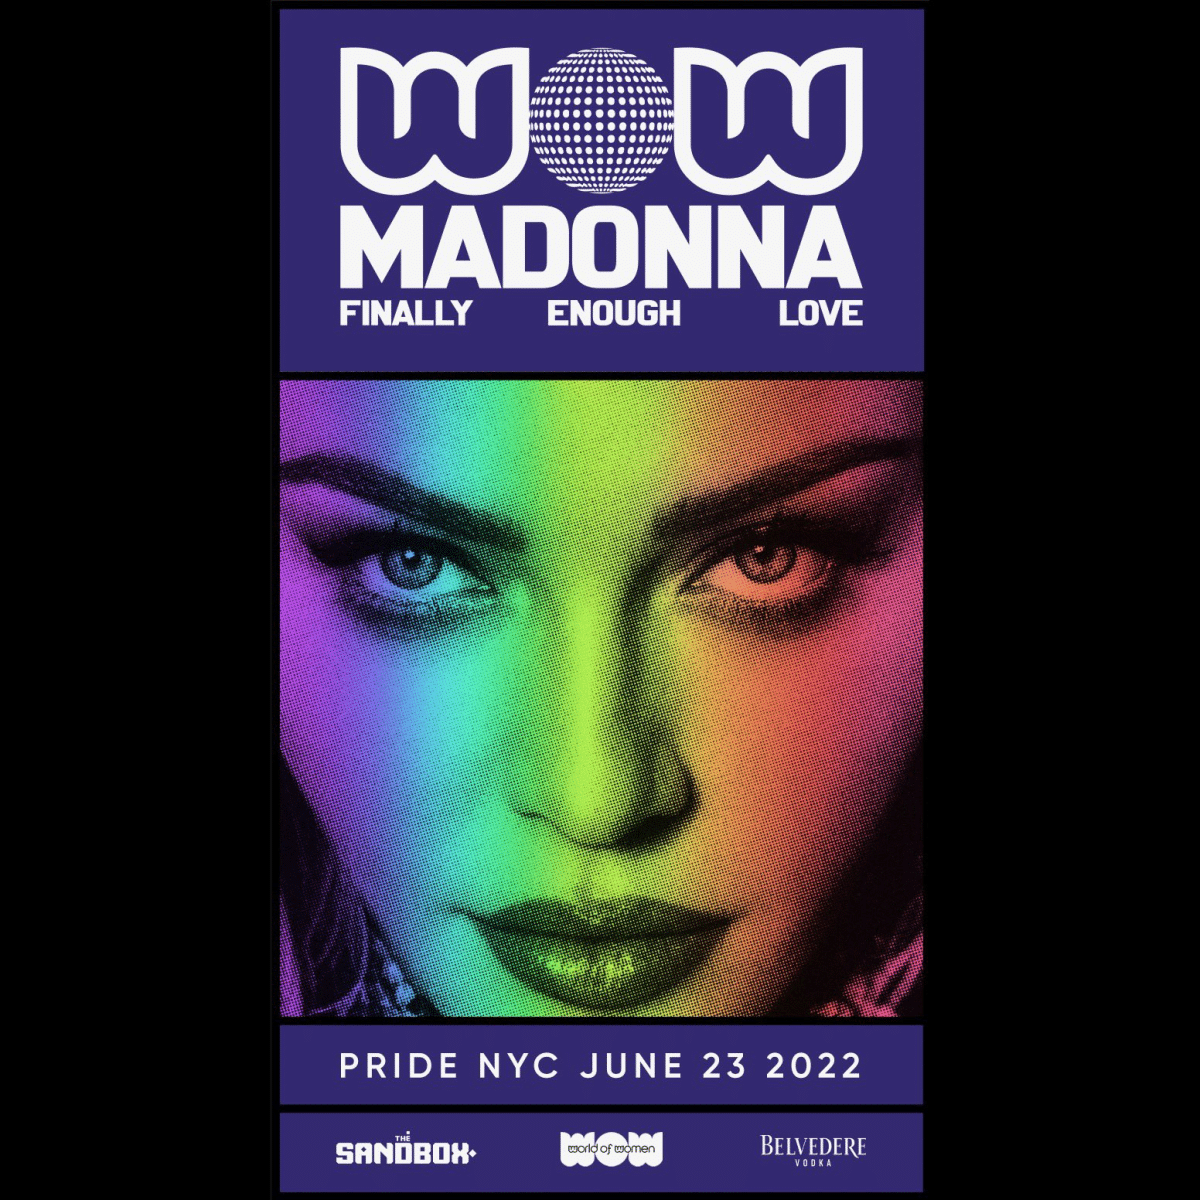 The image shows a poster from the World of Women NFT project featuring pop singer Madonna